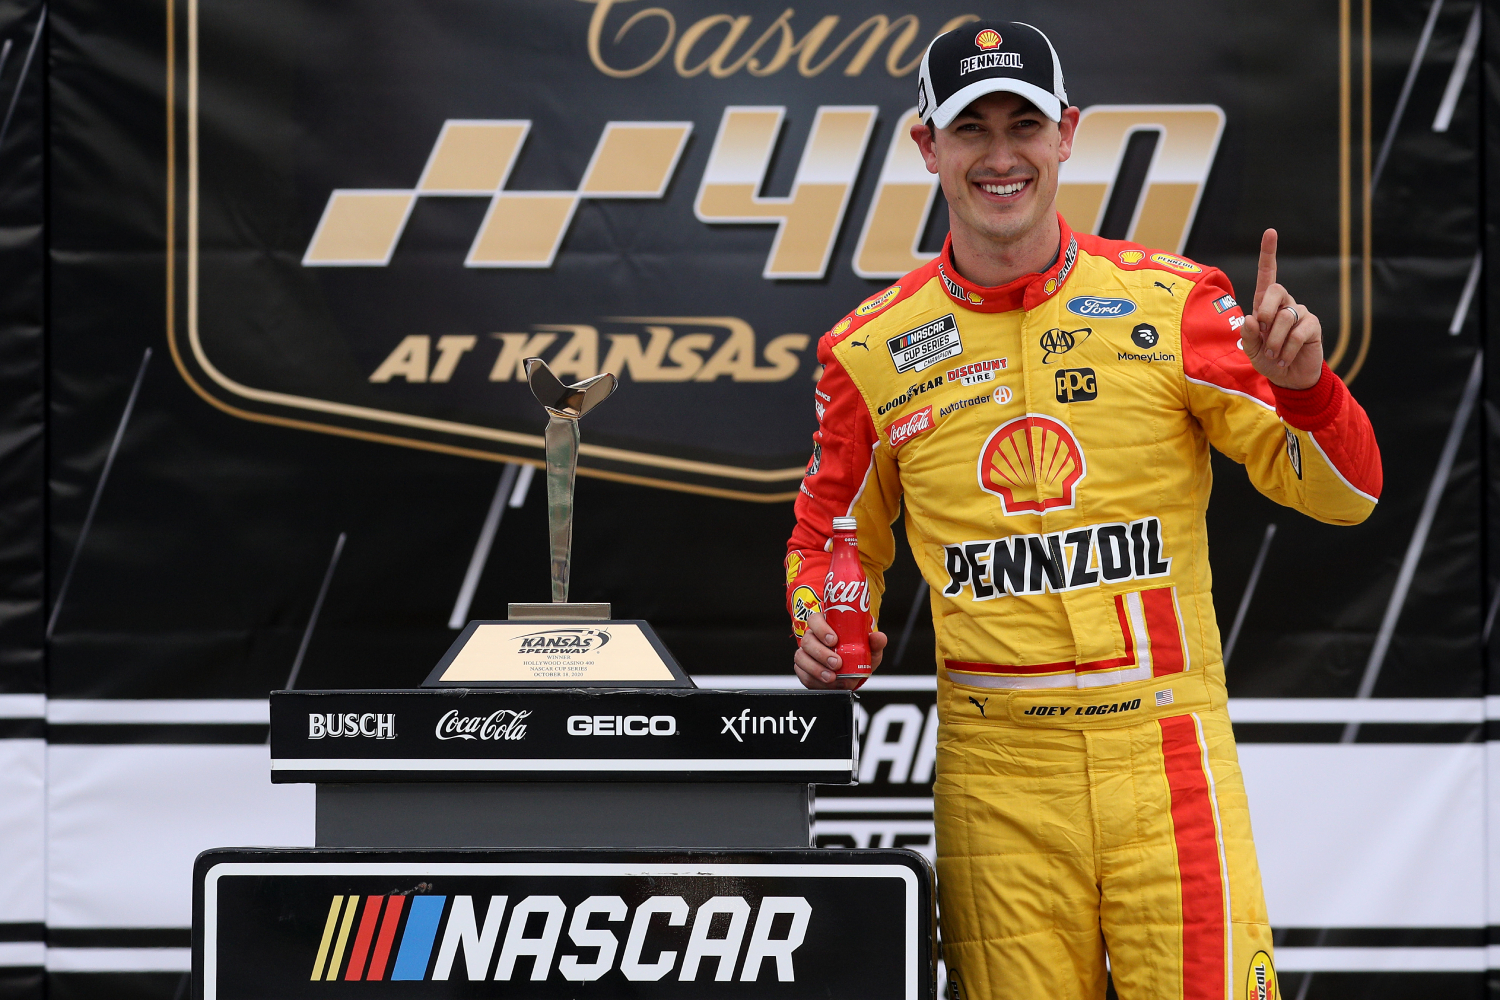 How Did NASCAR’s Joey Logano Become a New England Patriots Fan?